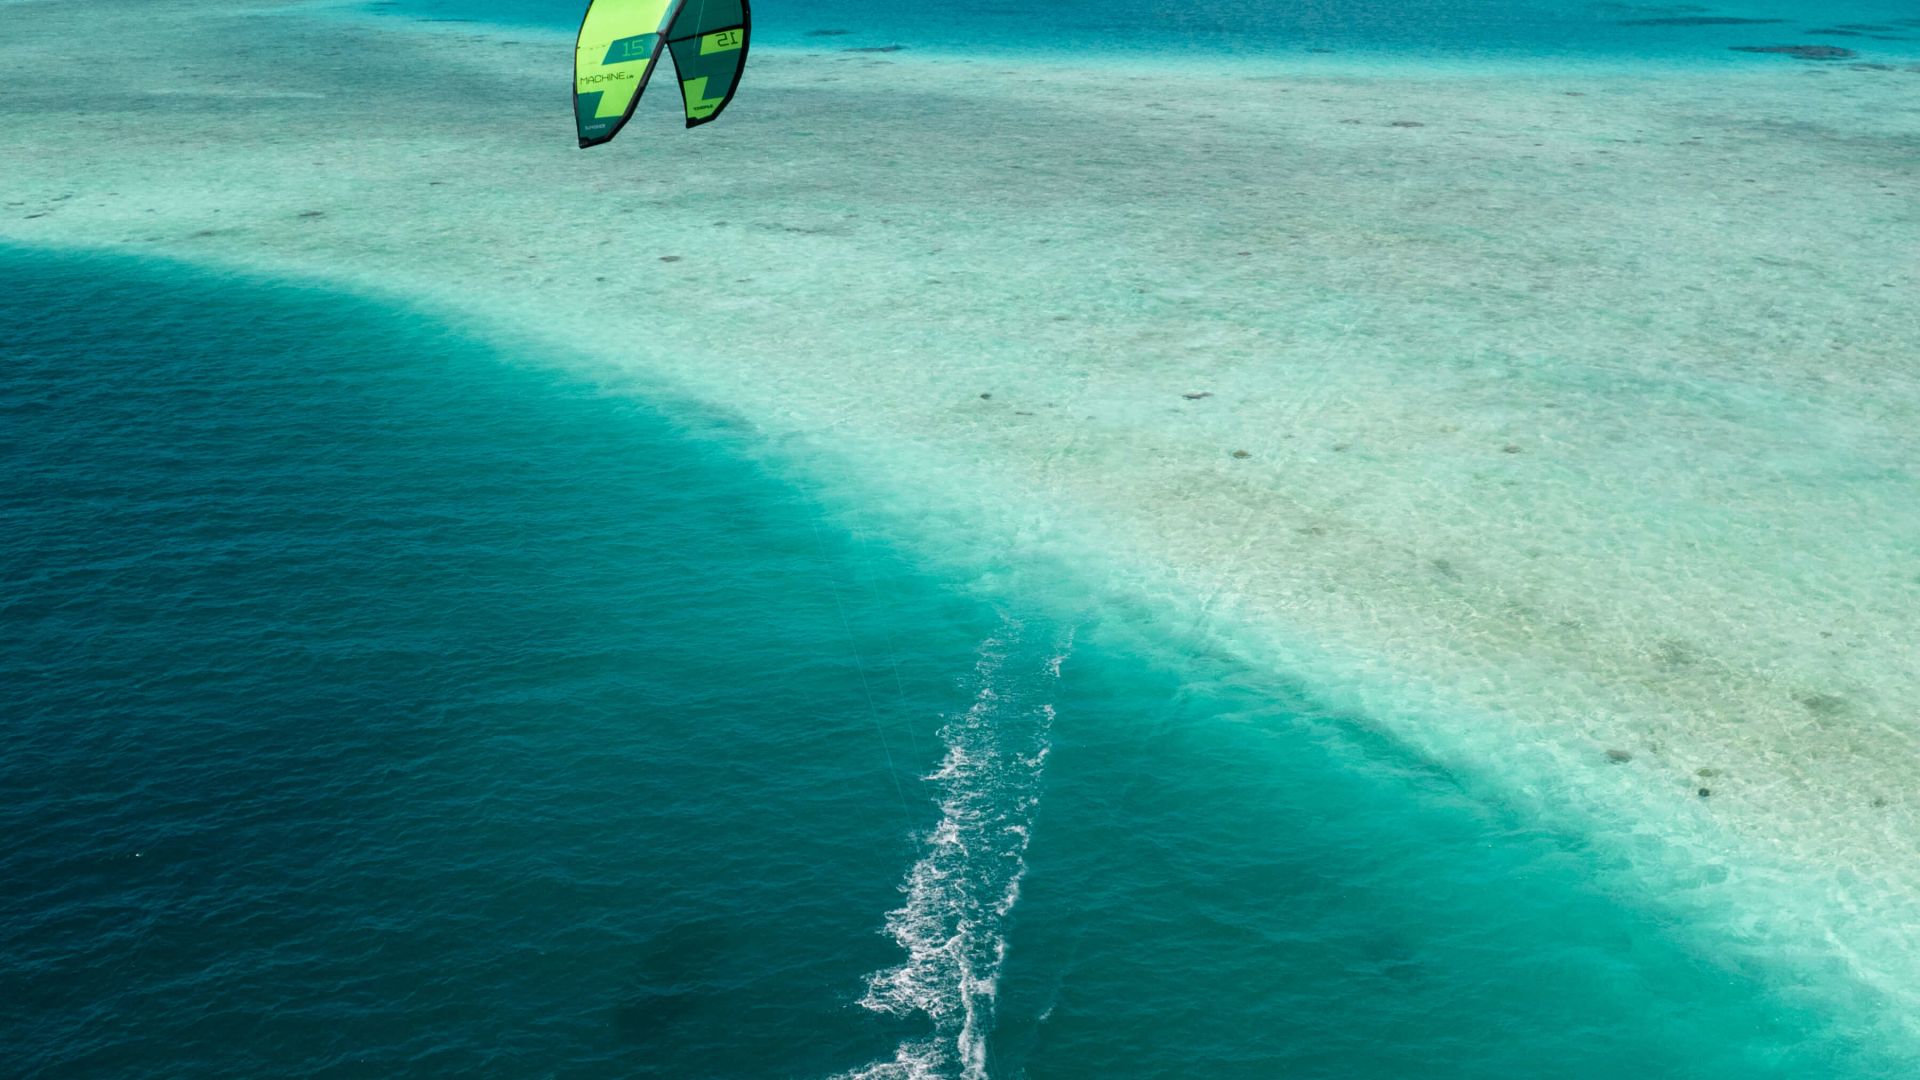 A Person Parasailing In The Ocean